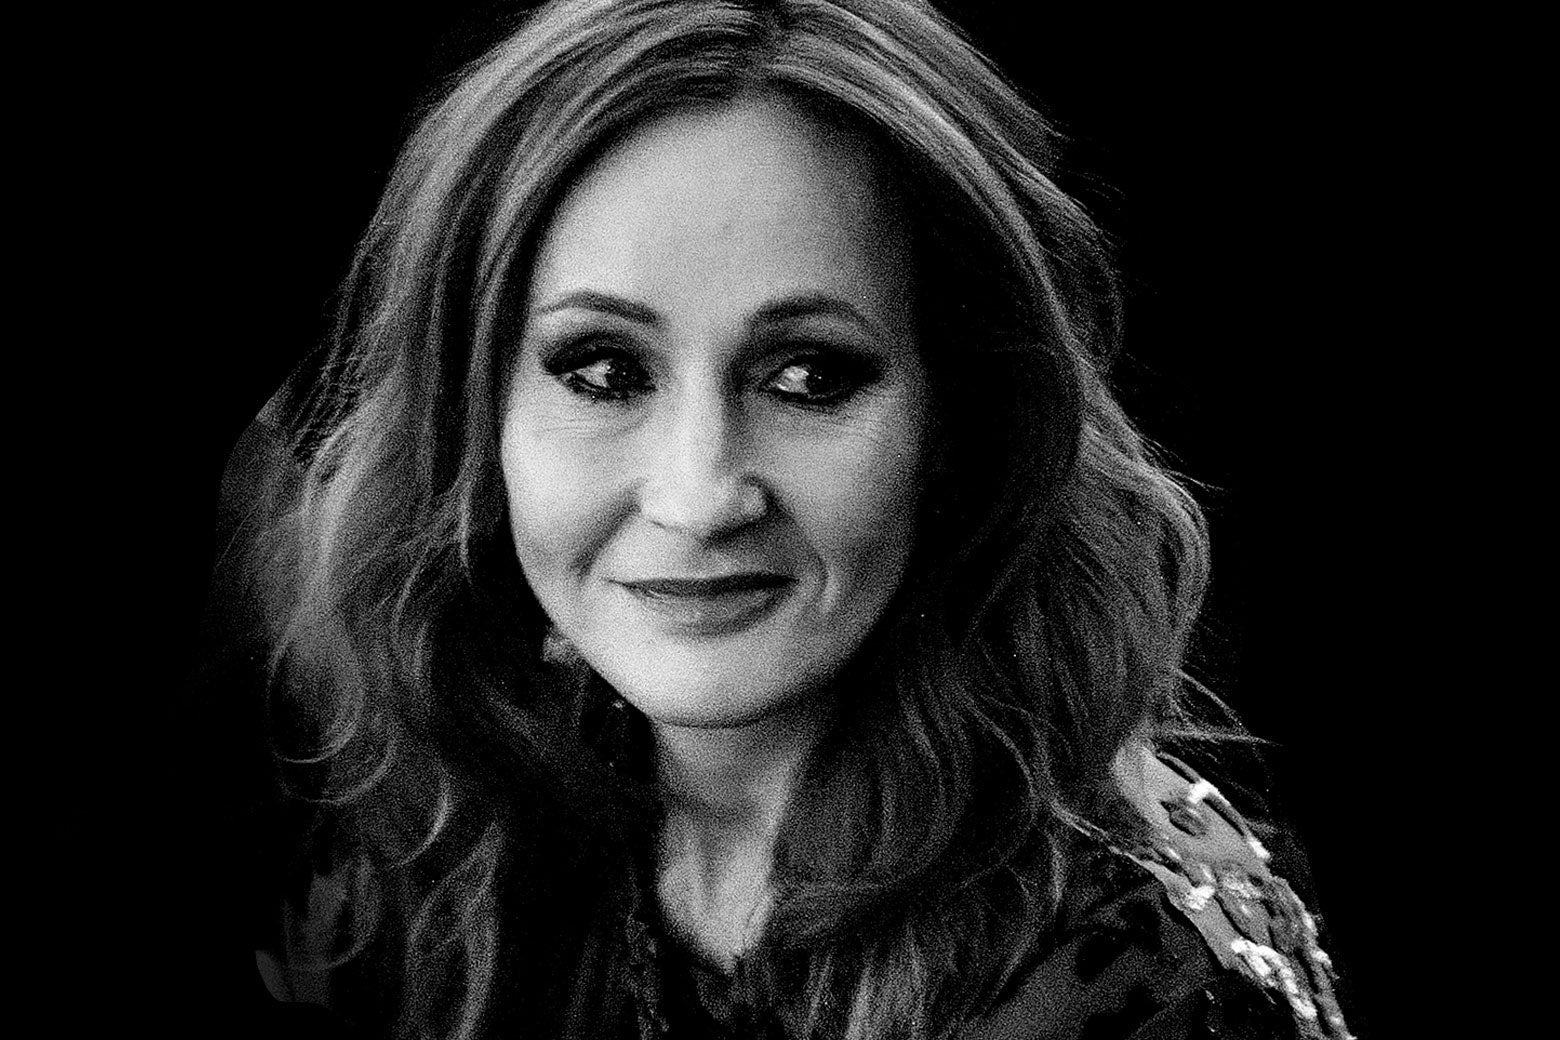 Black-and-white photo of J.K. Rowling.